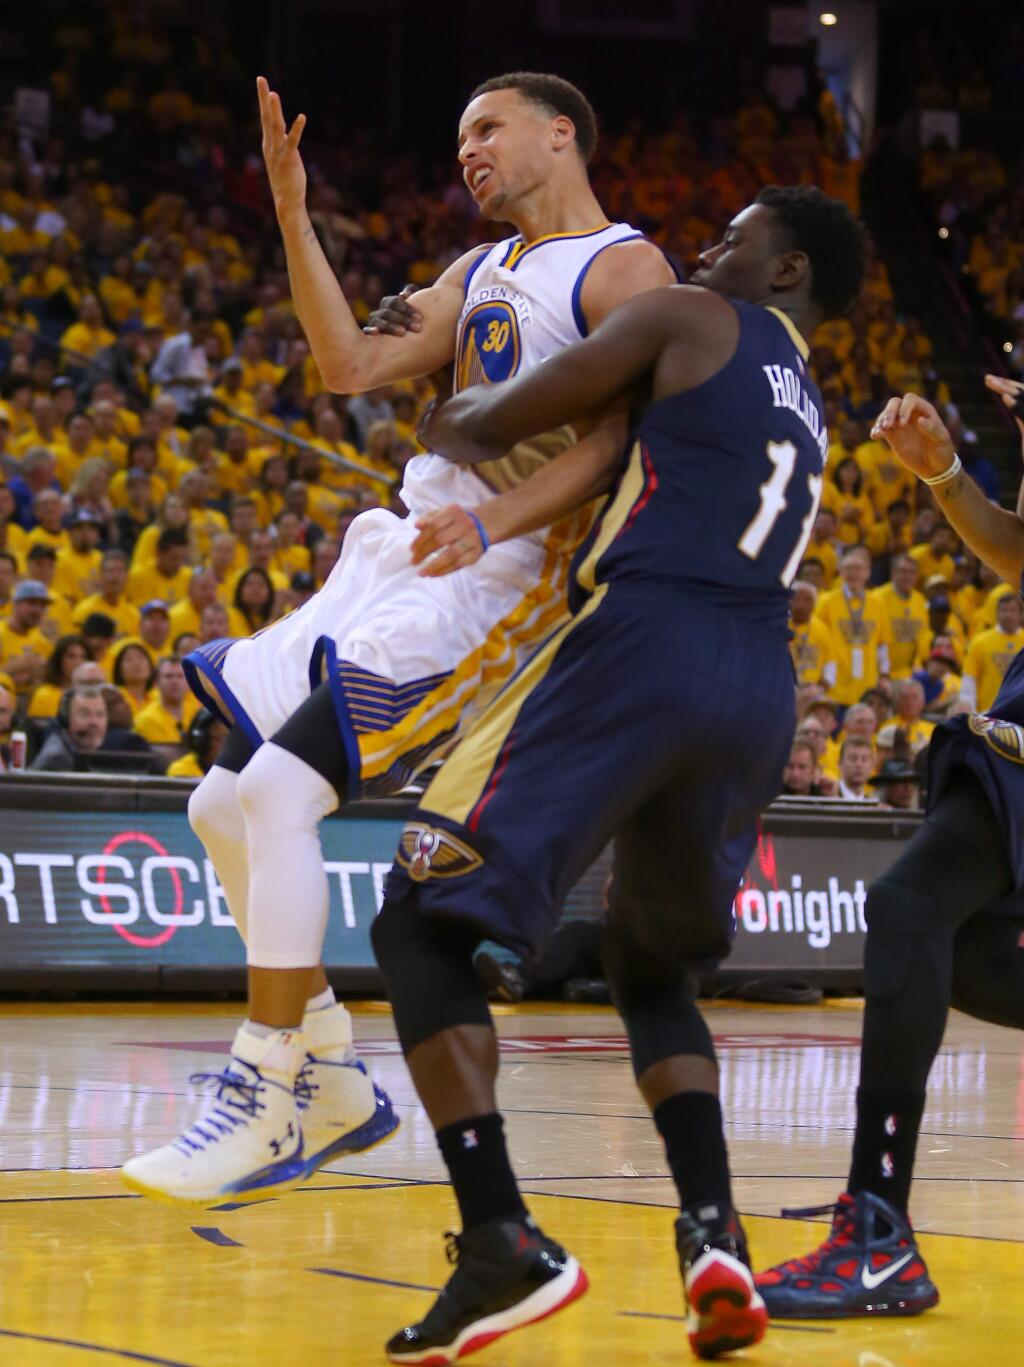 New Orleans Pelicans guard Jrue Holiday intentionally fouls Golden State Warriors guard Stephen Curry to prevent a breakaway basket during Game 1 of the first round of the NBA Western Conference playoffs at Oracle Arena, in Oakland on Saturday, April 18, 2015. The Warriors defeated the Pelicans 106-99.(Christopher Chung/ The Press Democrat)